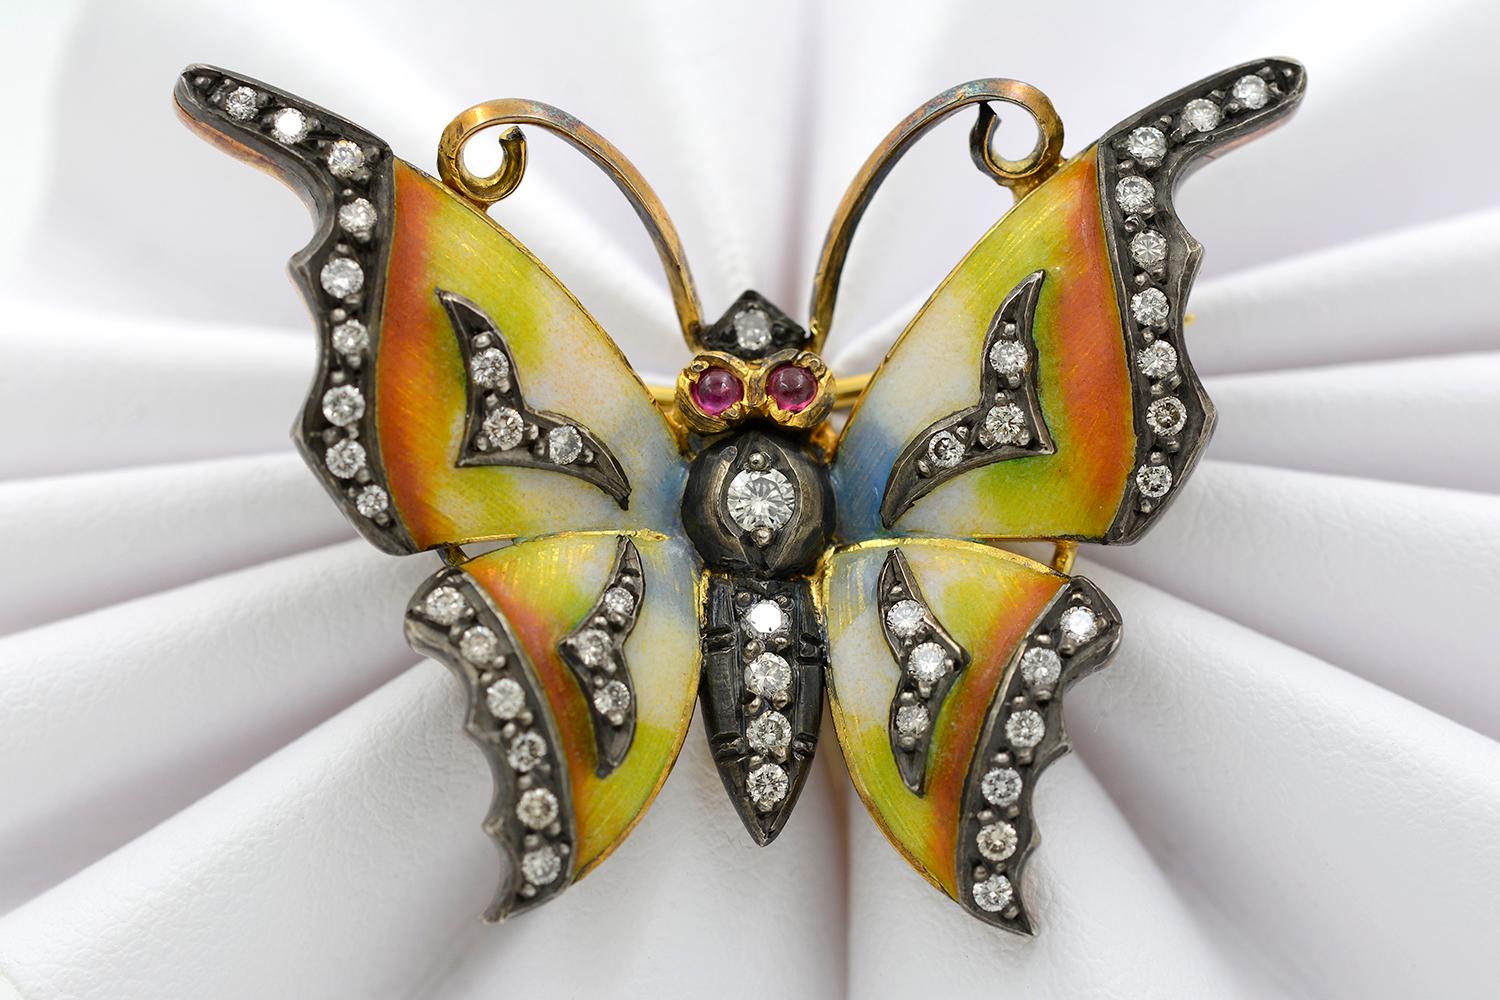 This charming Arts & Crafts style enamel butterfly pin is crafted from 18 karat yellow gold. The pin features yellow and orange enamel set with 30 round brilliant cut diamonds weighing approximately 0.65 carats combined and two cabochon rubies for